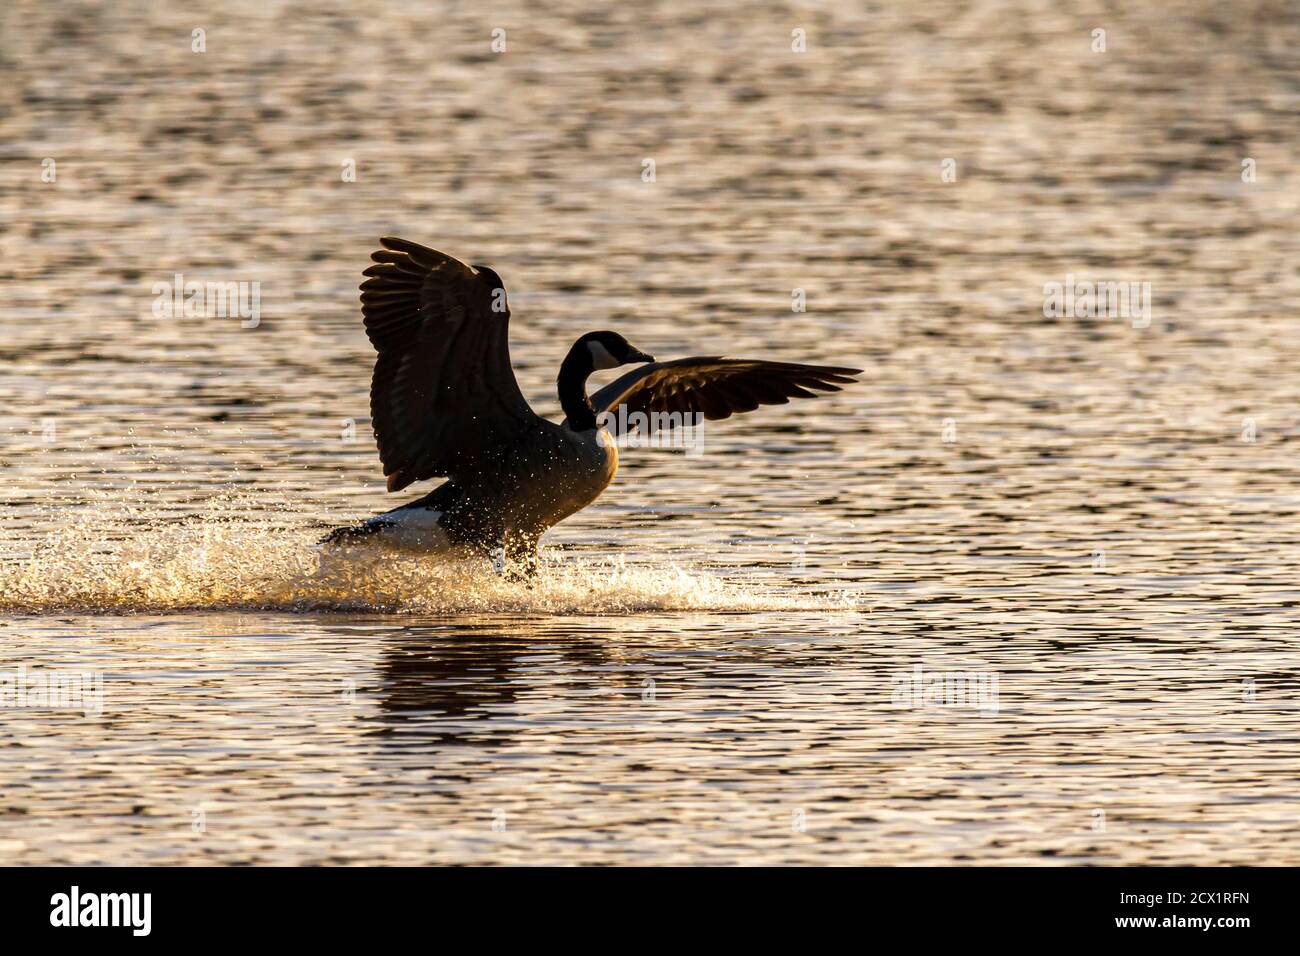 A canada goose (Branta canadensis) is landing on Patuxent river in Maryland. Its wings are wide open and it generates a big splash on the calm water. Stock Photo